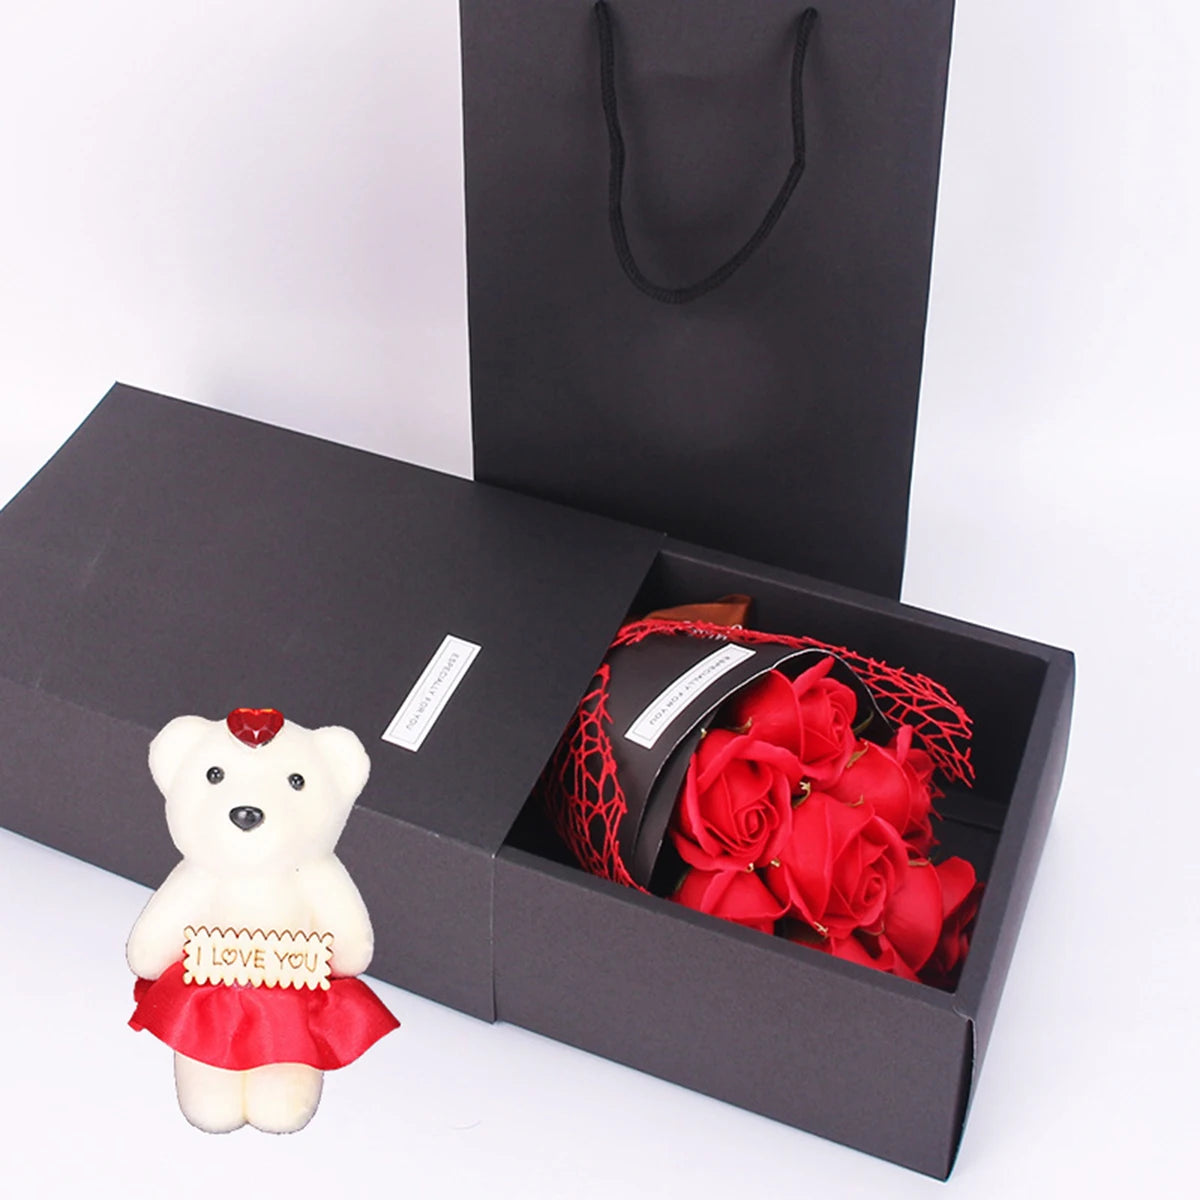 1Pc Handmade 7 Rose Soap Bouquet Little Bear Gift Box,Creative Valentine's Day Mother's Day Birthday Party Rose Flower Gift